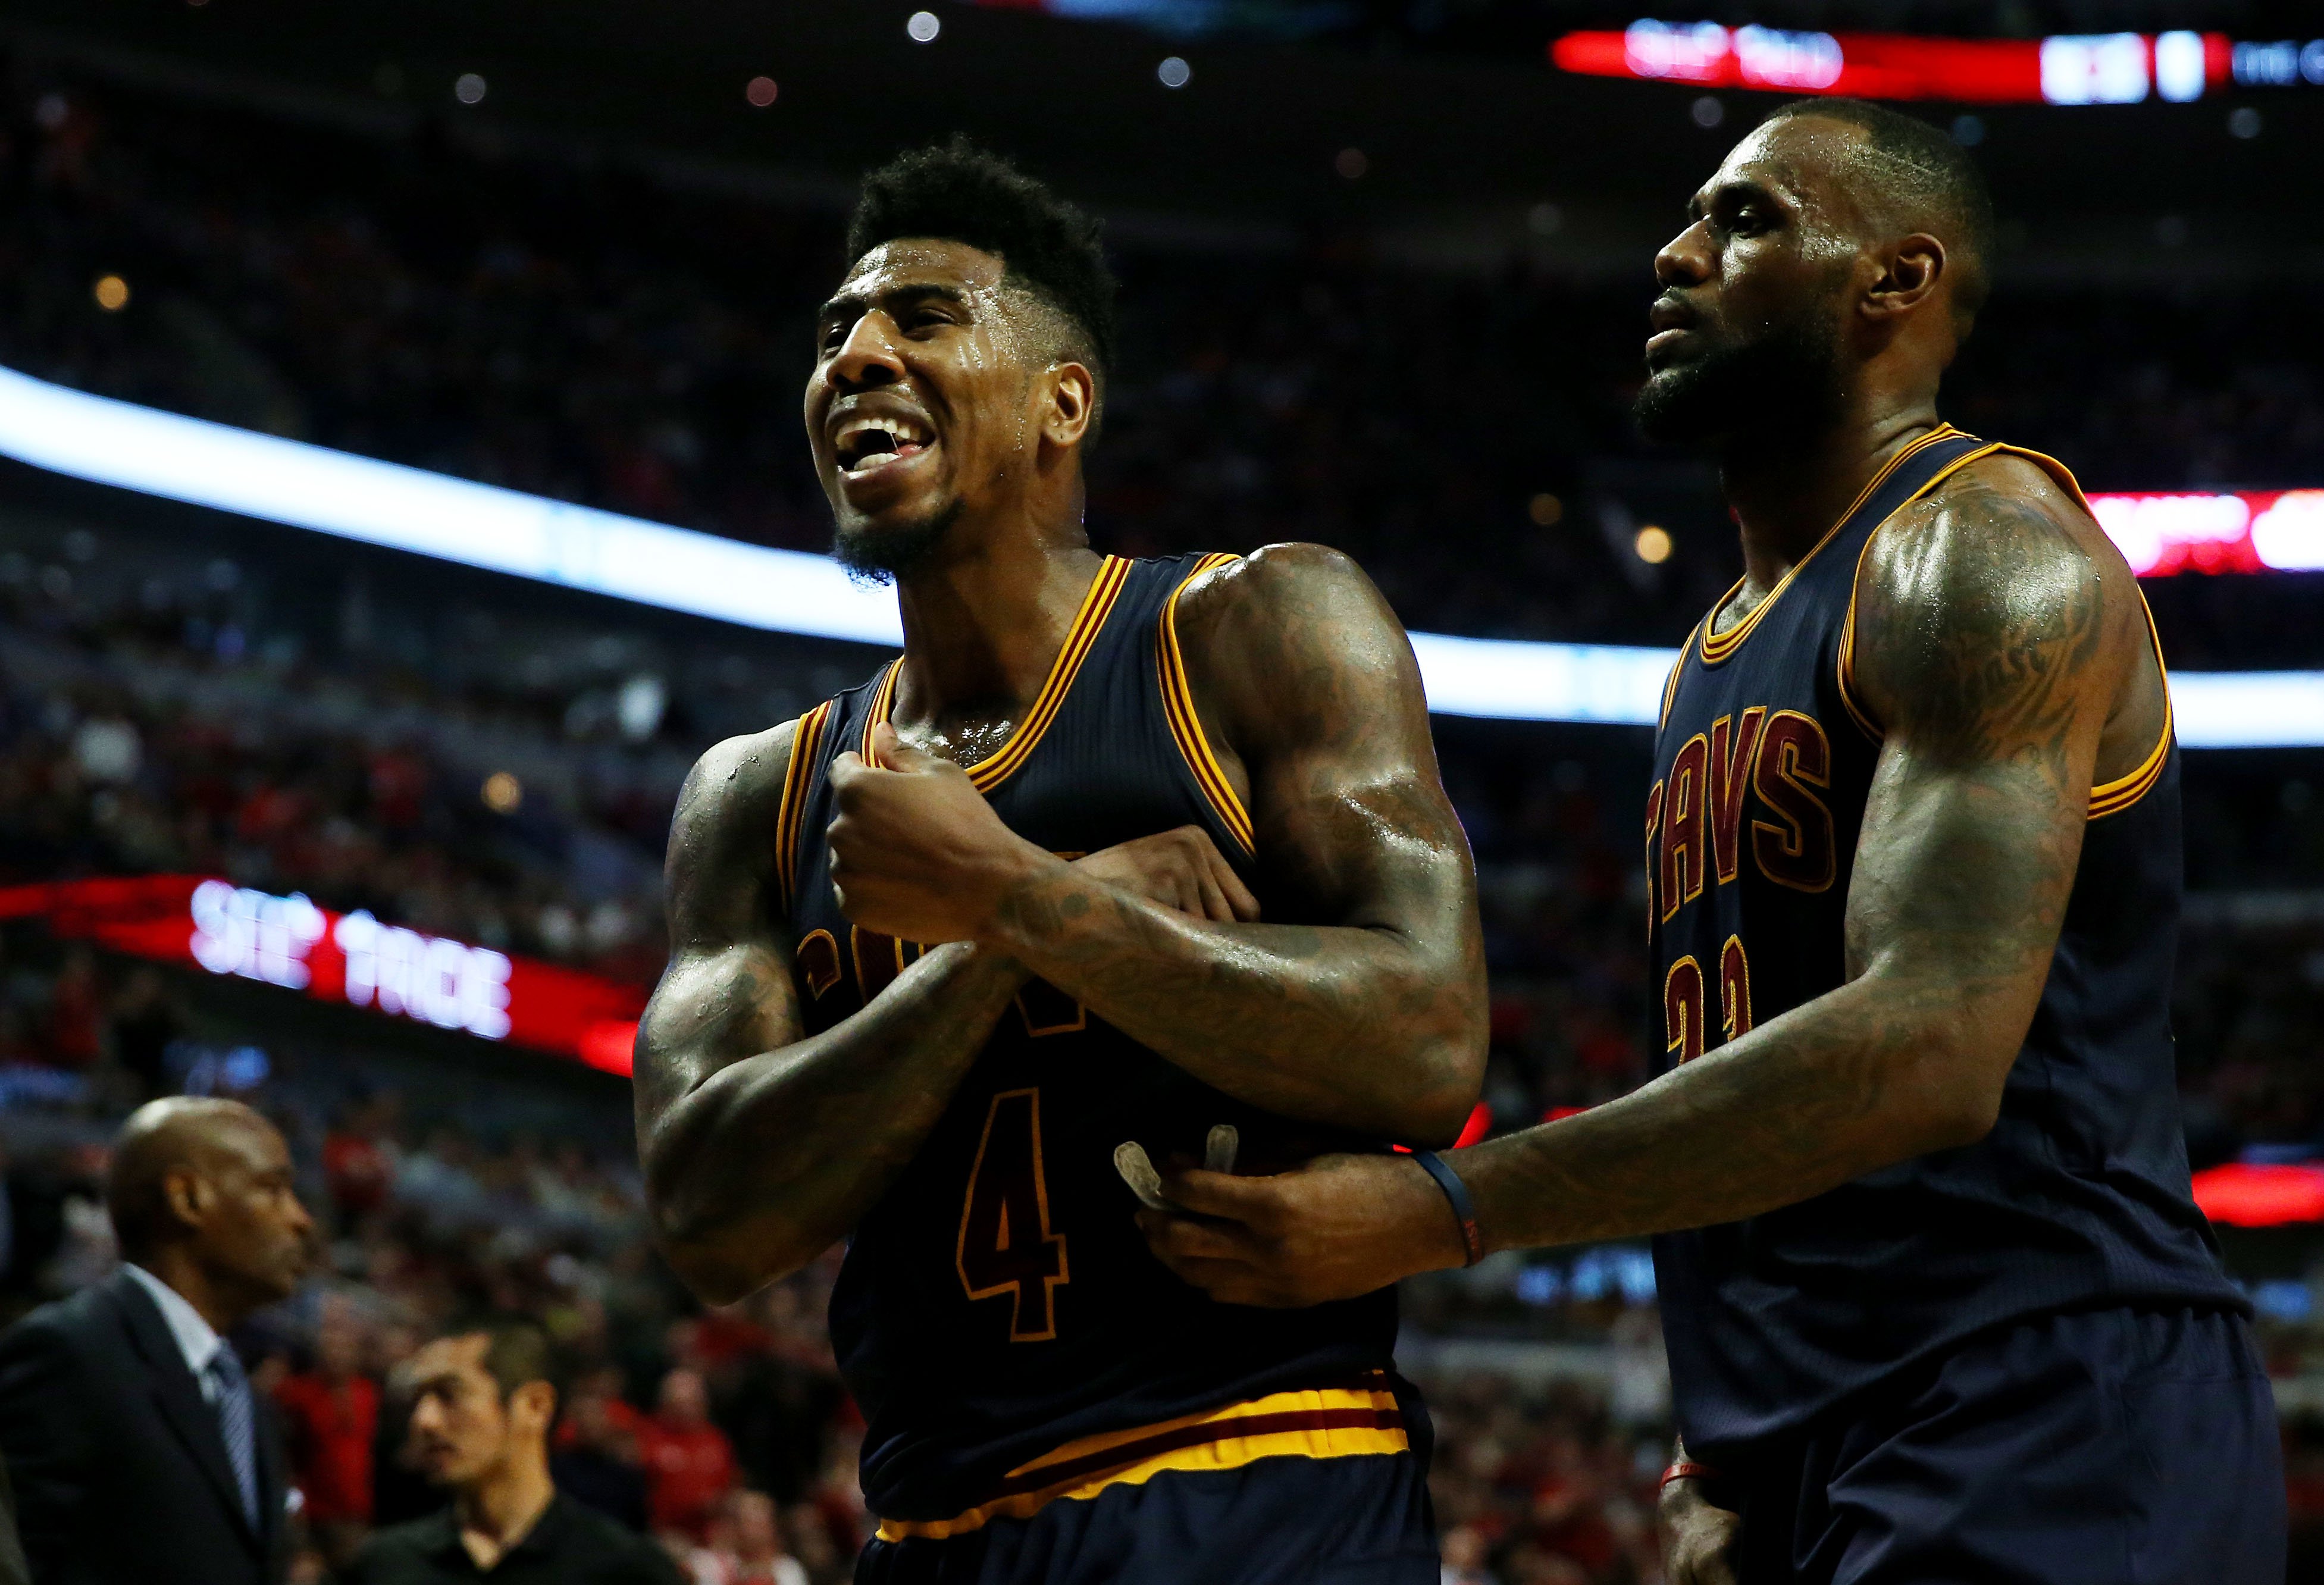 Iman Shumpert and LeBron James reacting in the second quarter against the Chicago Bulls during Game 6 of the Eastern Conference Semifinals